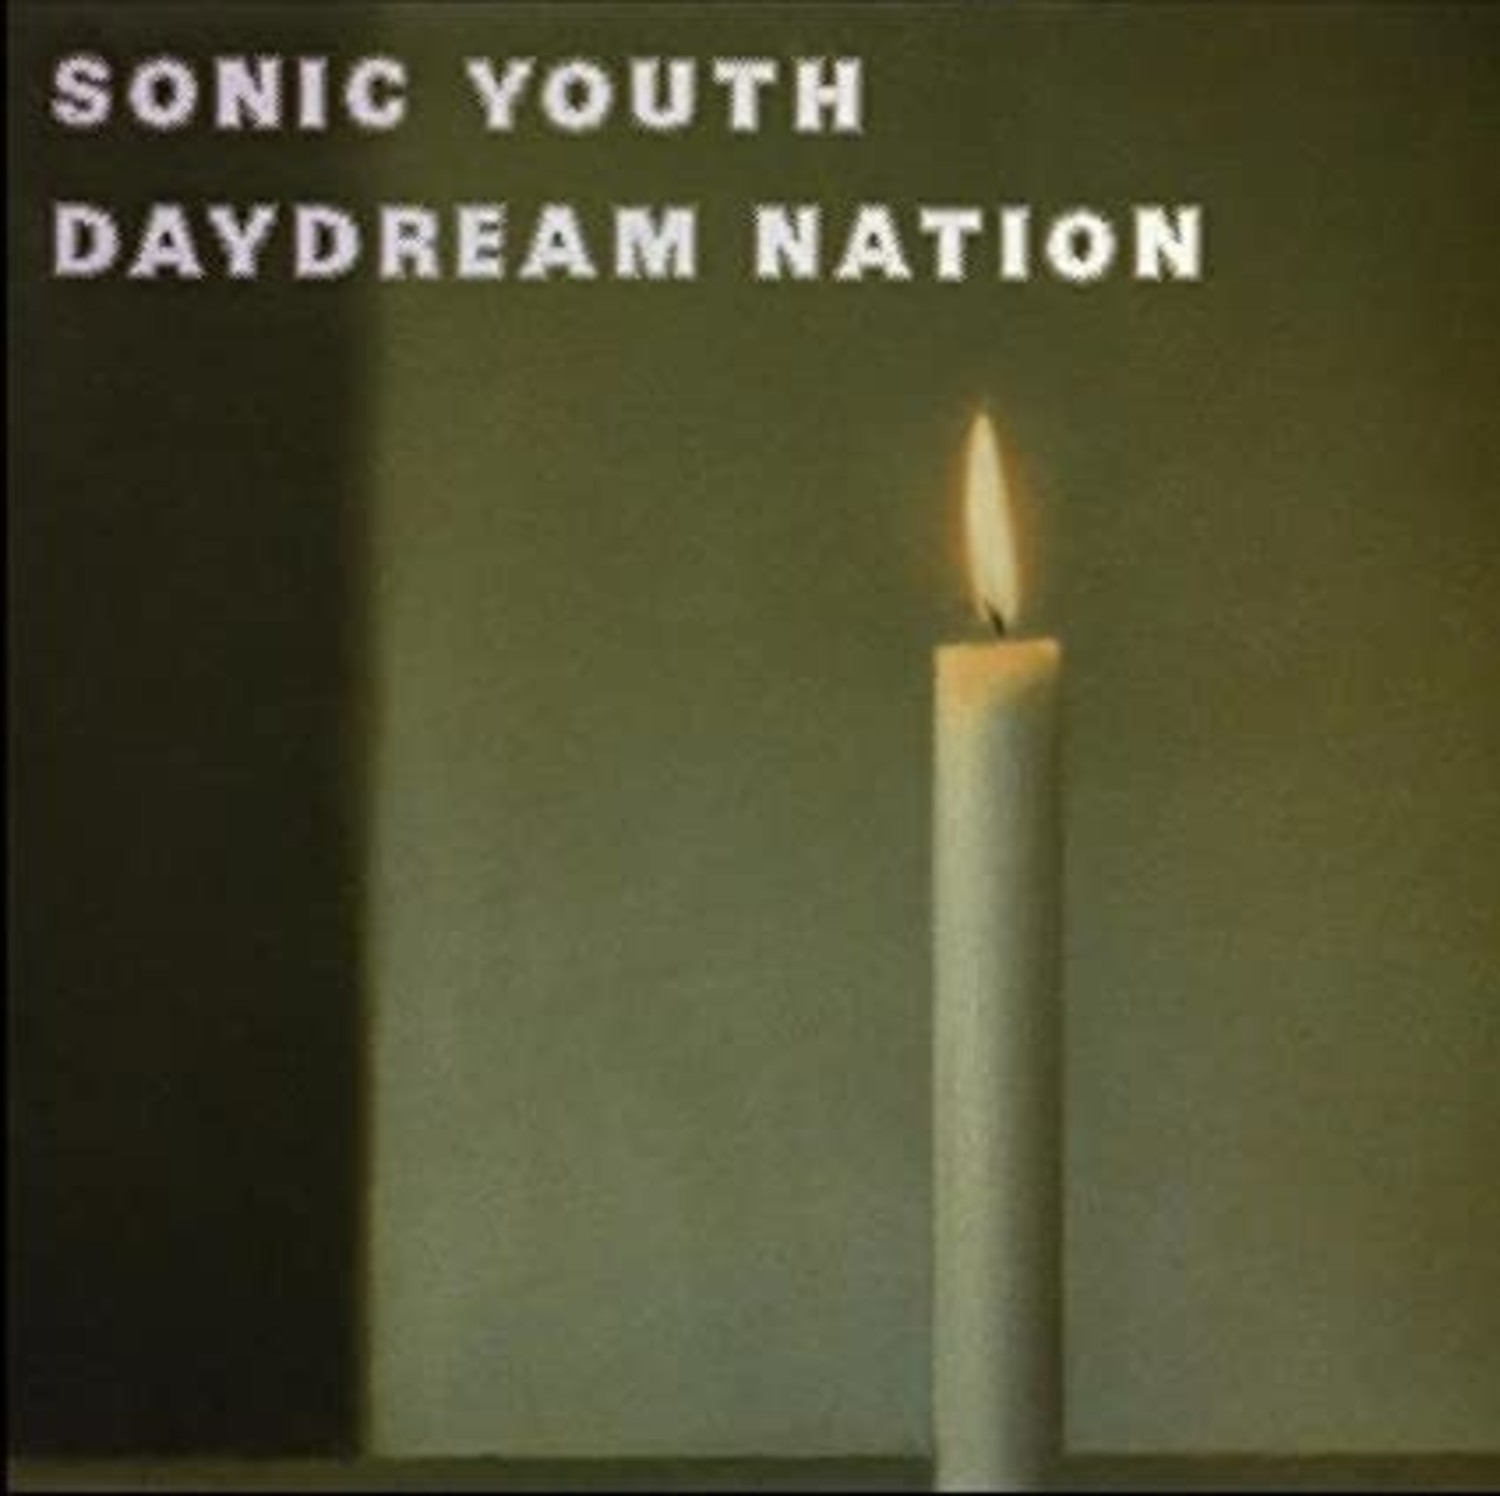 Sonic Youth - Daydream Nation 2xlp - Wax Trax Records